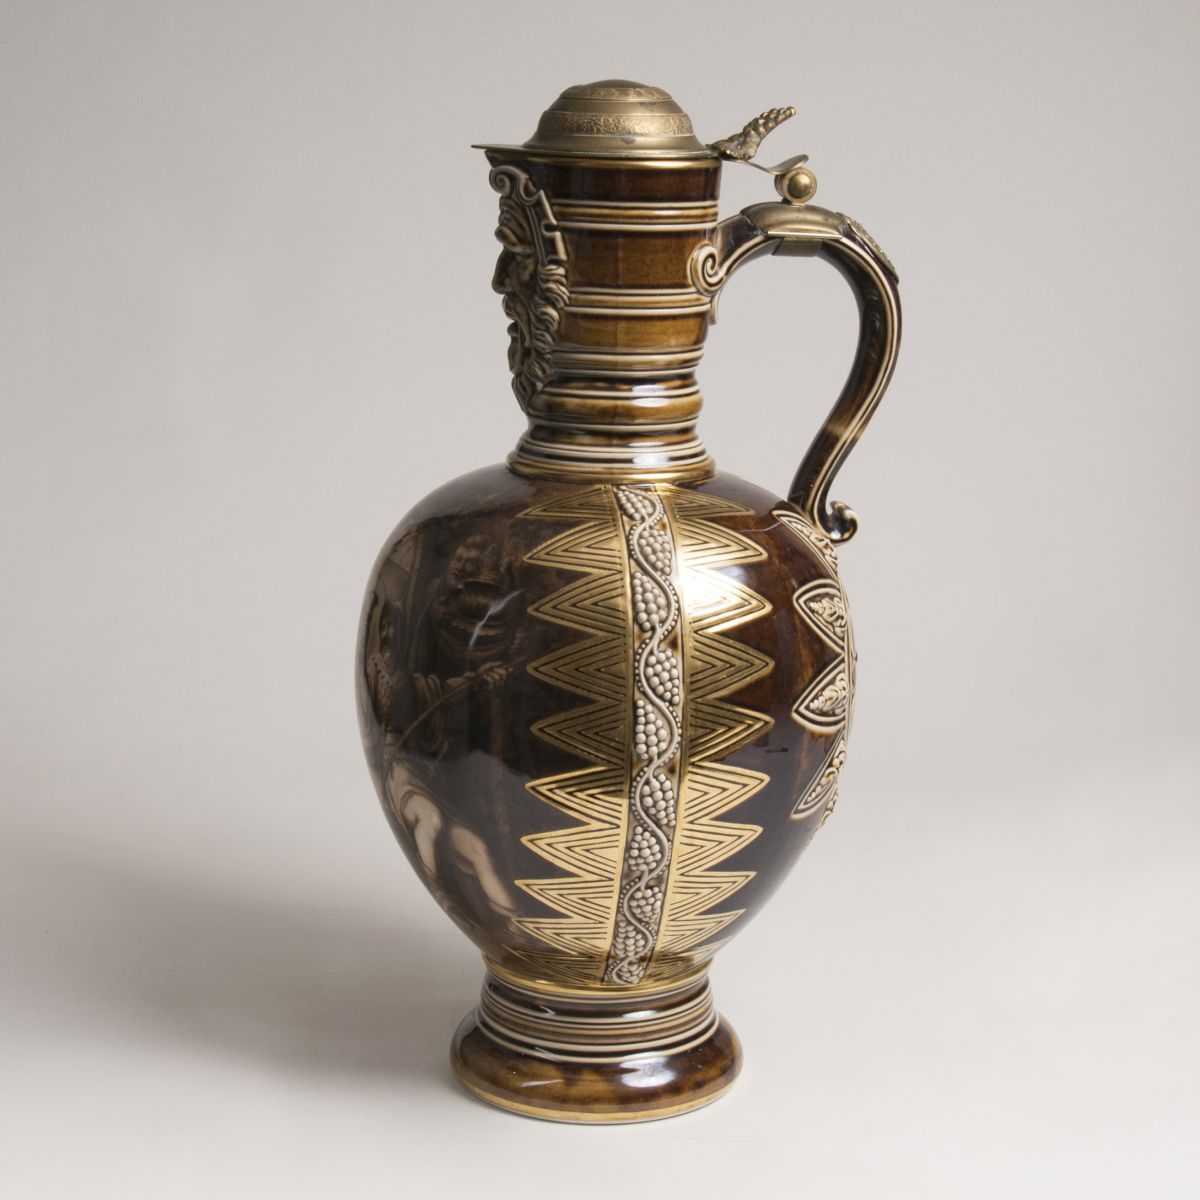 An Extraordinary Large Wilhelmine Jug with a Face Mask - image 2